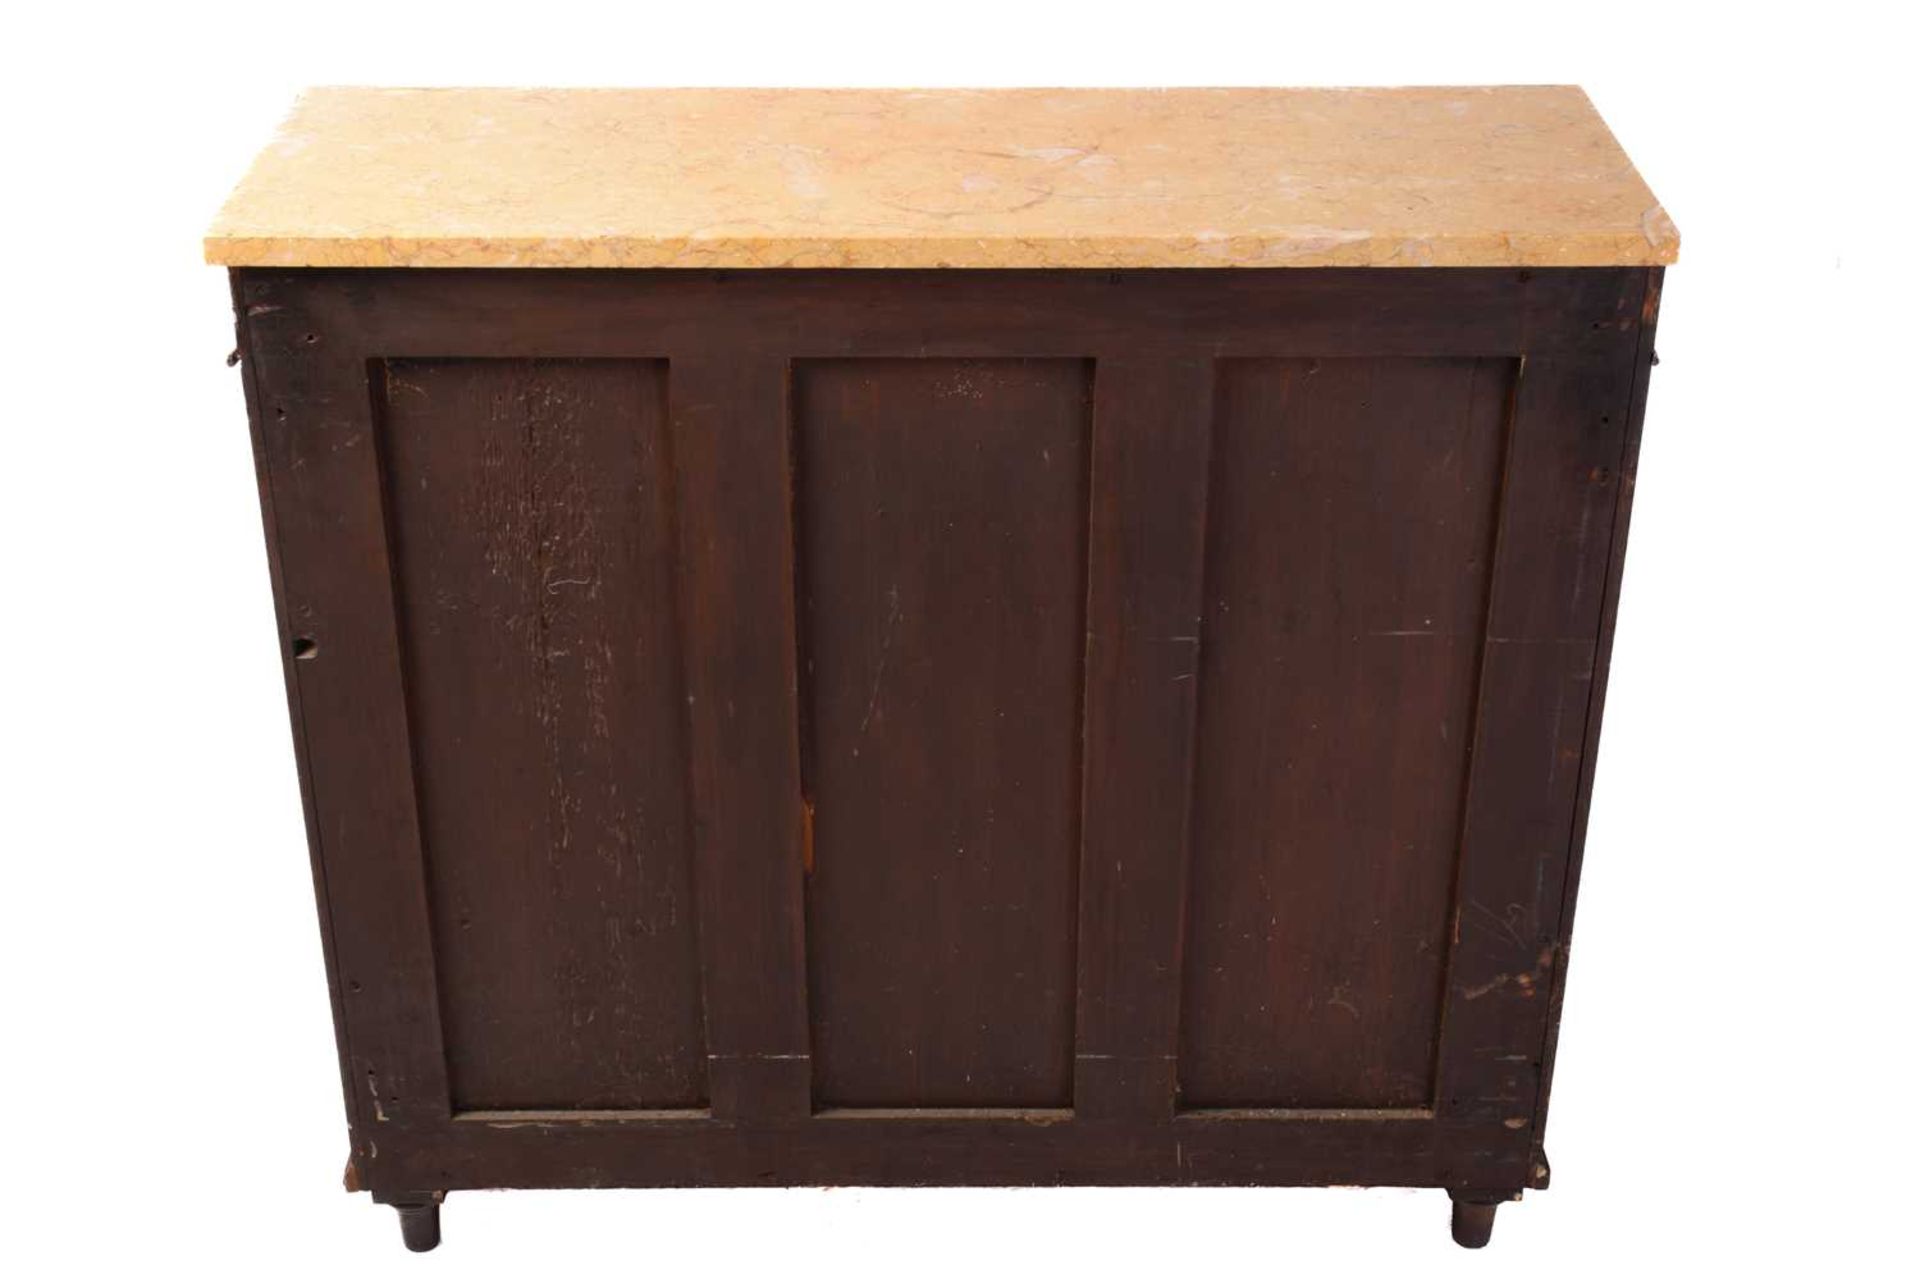 A Regency brass inlaid rosewood chiffonier in the manner of John Maclean, with sienna marble top, - Image 5 of 8